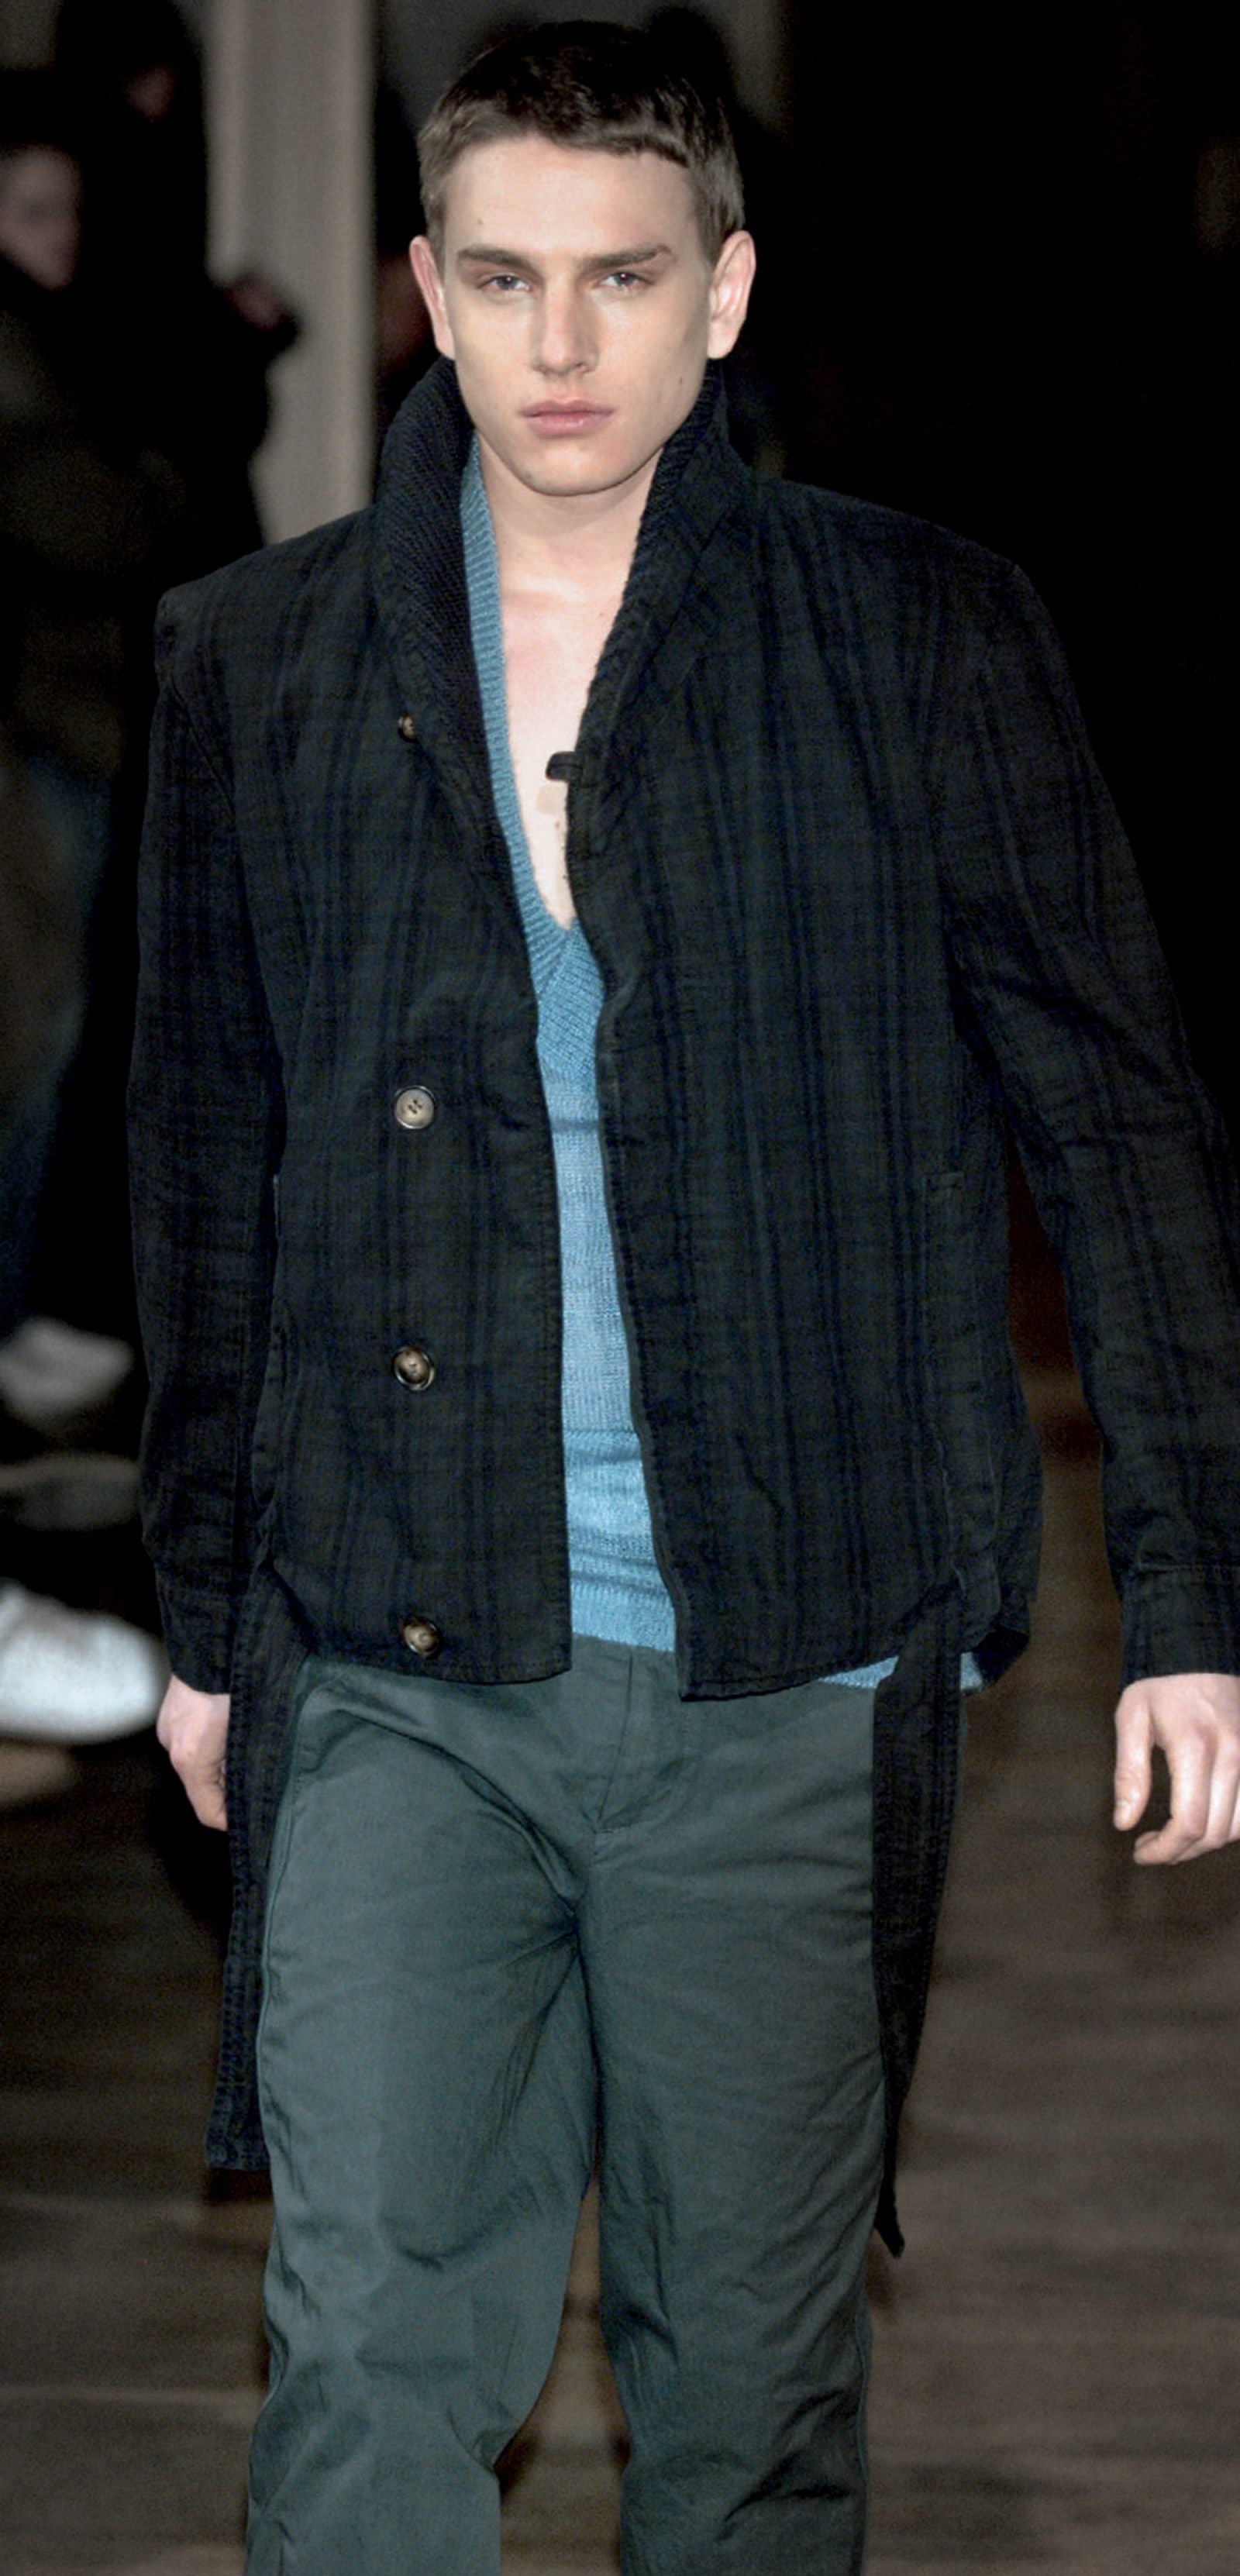 2006 A/W SHAWL COLLAR JACKET IN OVERDYED COTTON